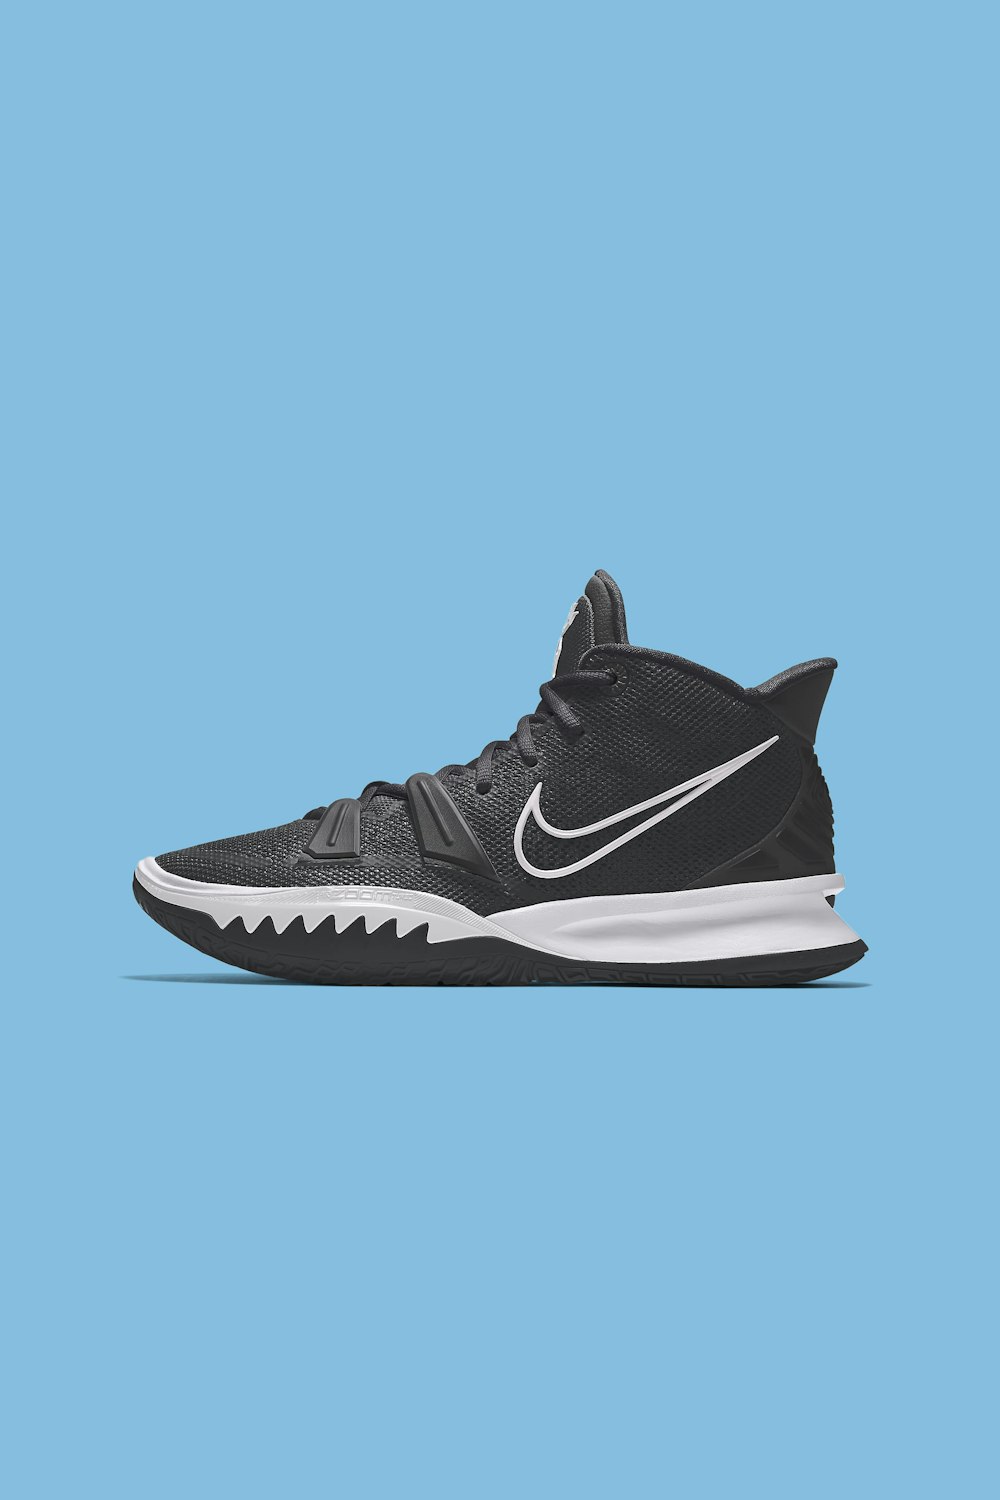 20+ Nike Shoes Pictures | Download Free Images & Stock Photos on Unsplash